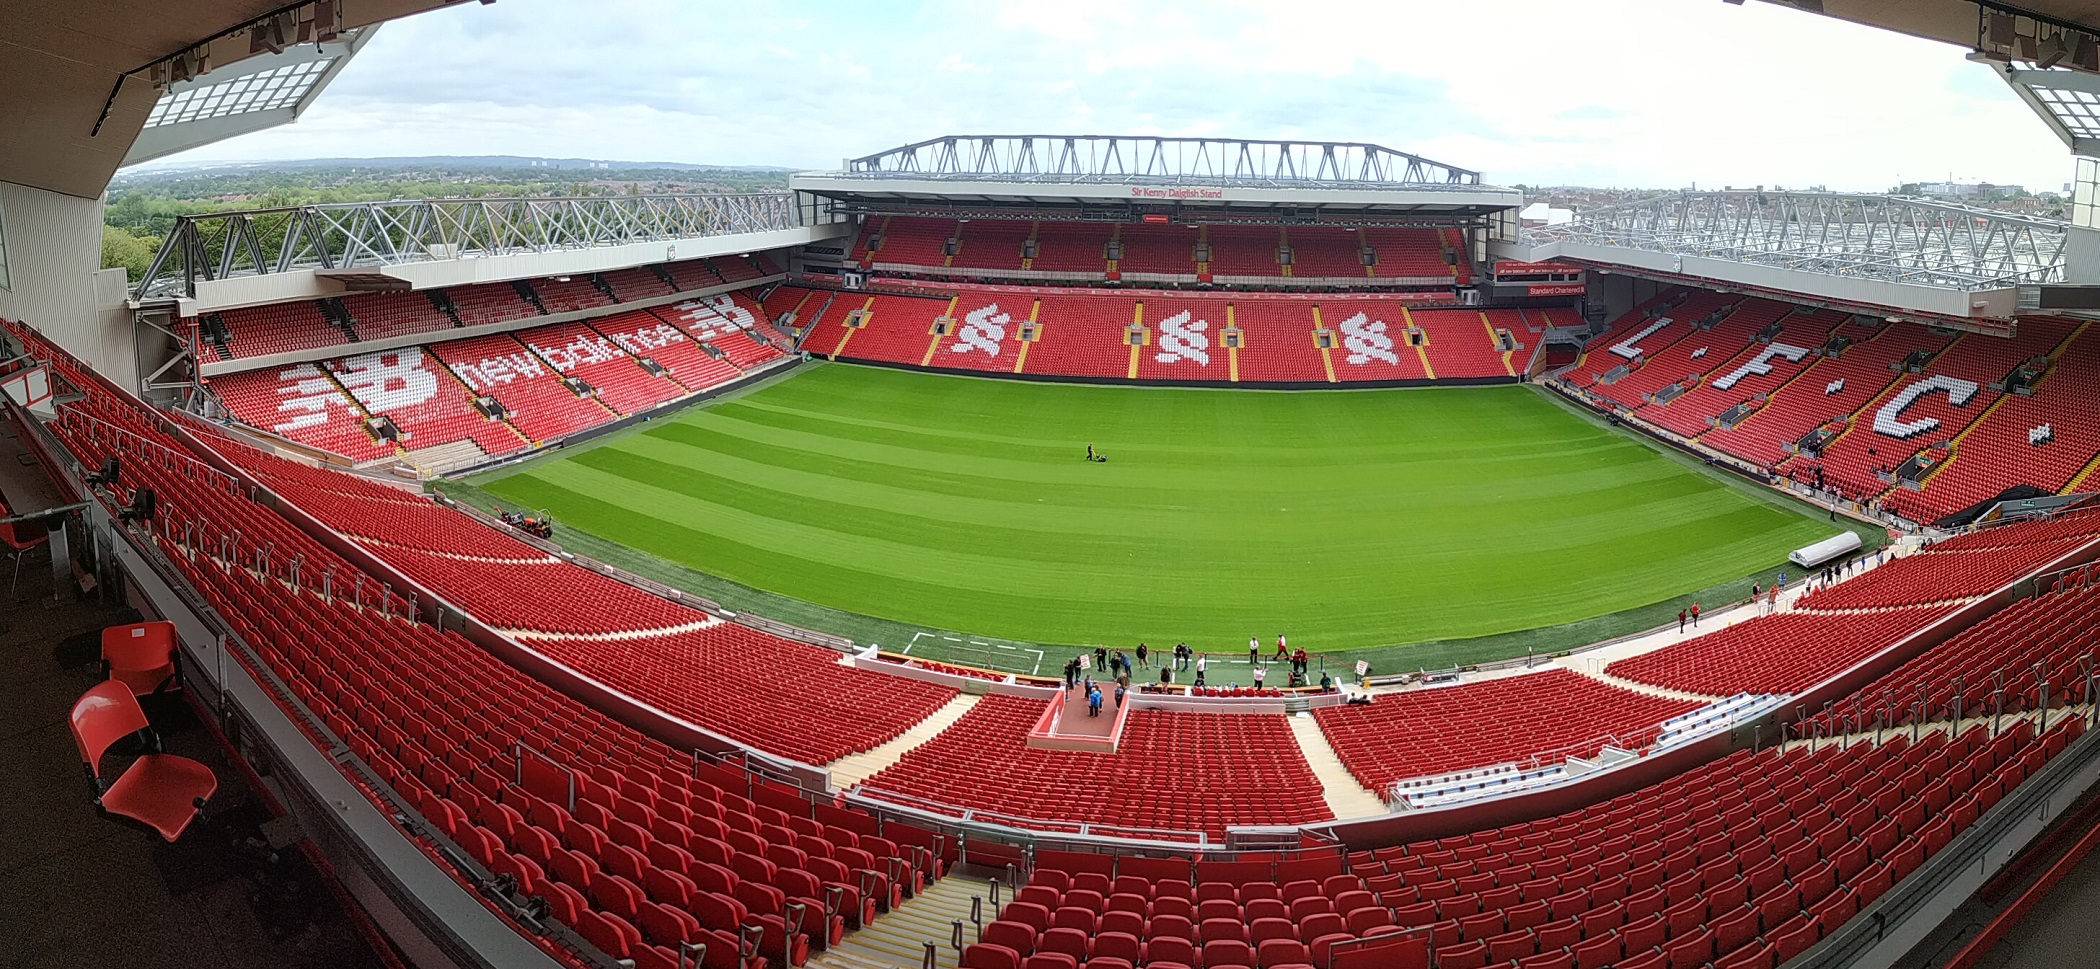  A panoramic view of the inside of Anfield, the home stadium of Liverpool Football Club, showing the empty stands and the green pitch.